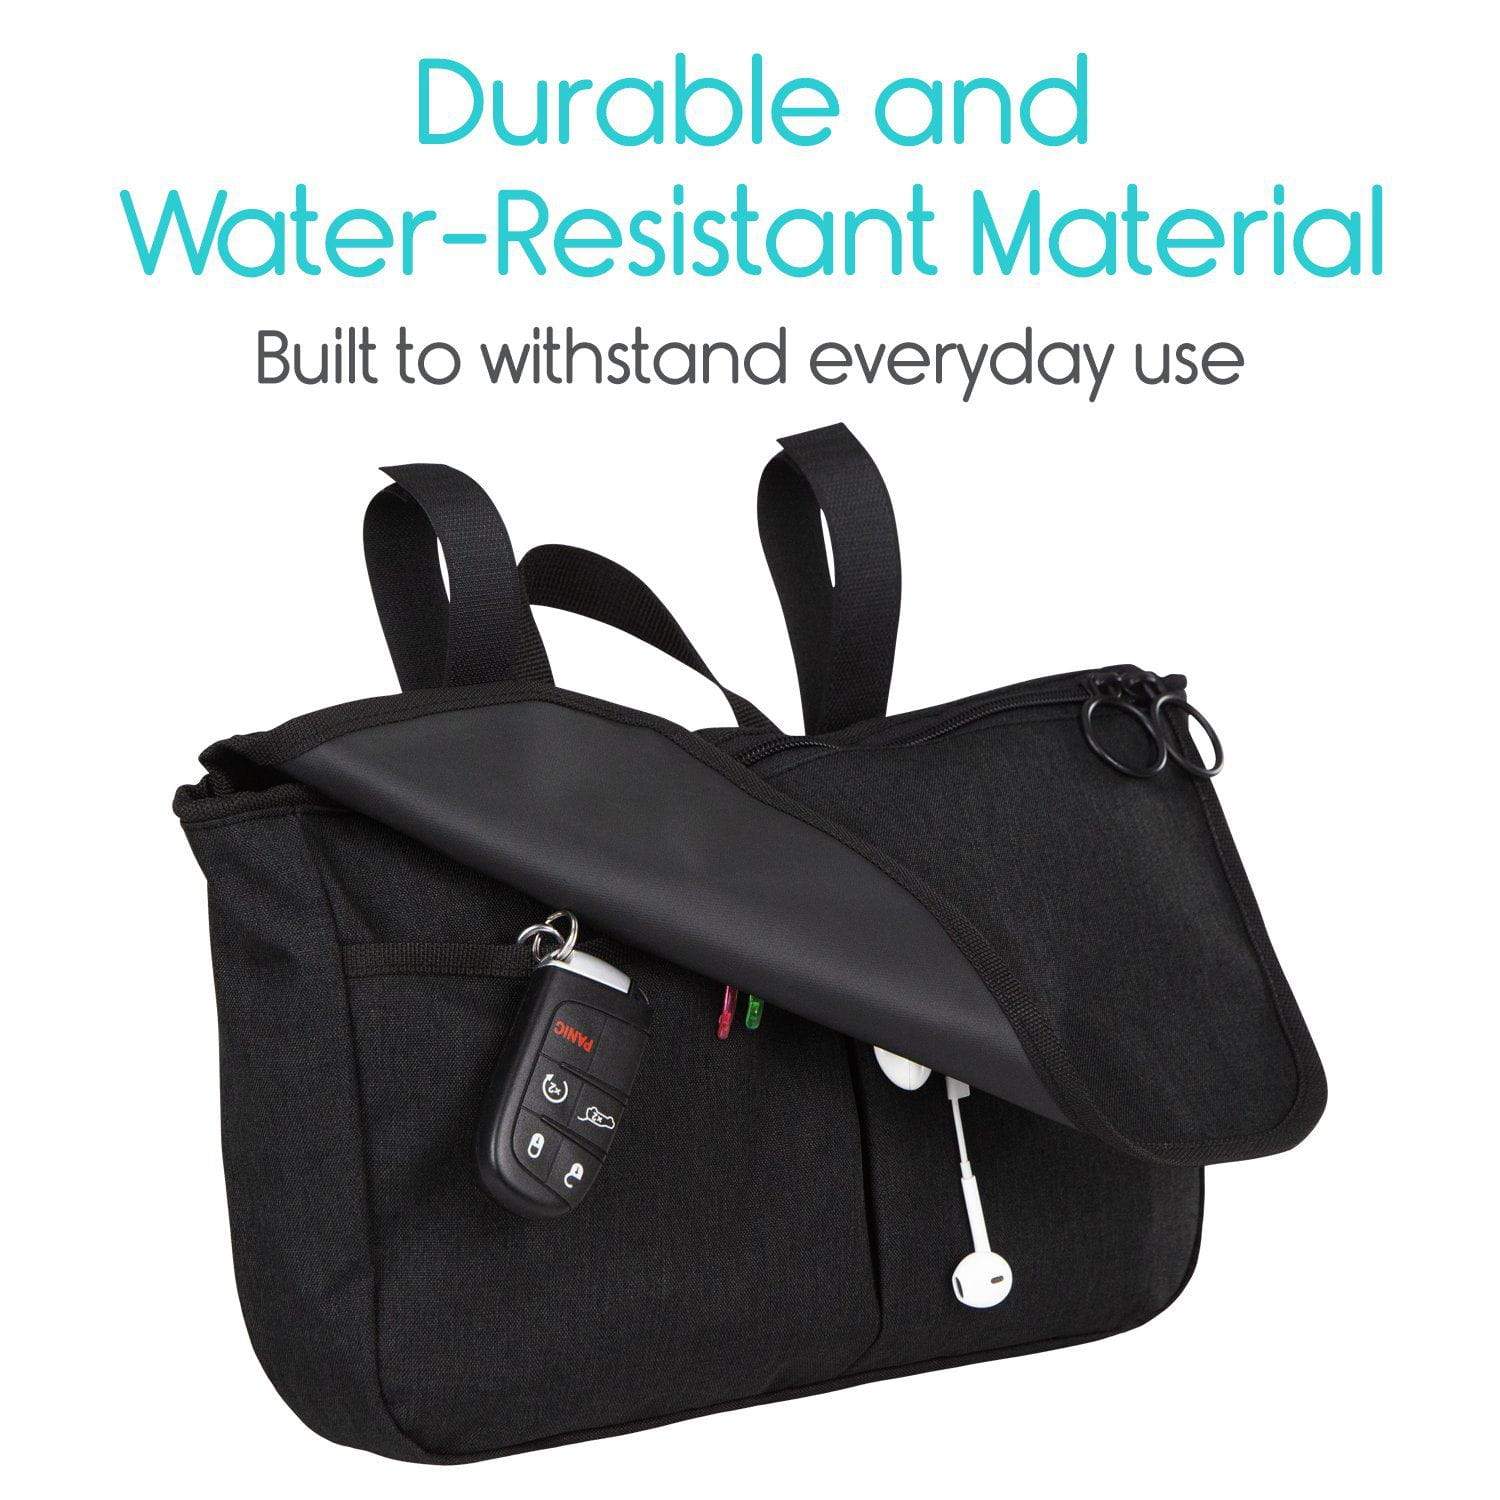 mobility side bag described with water resistant material from AskSAMIE